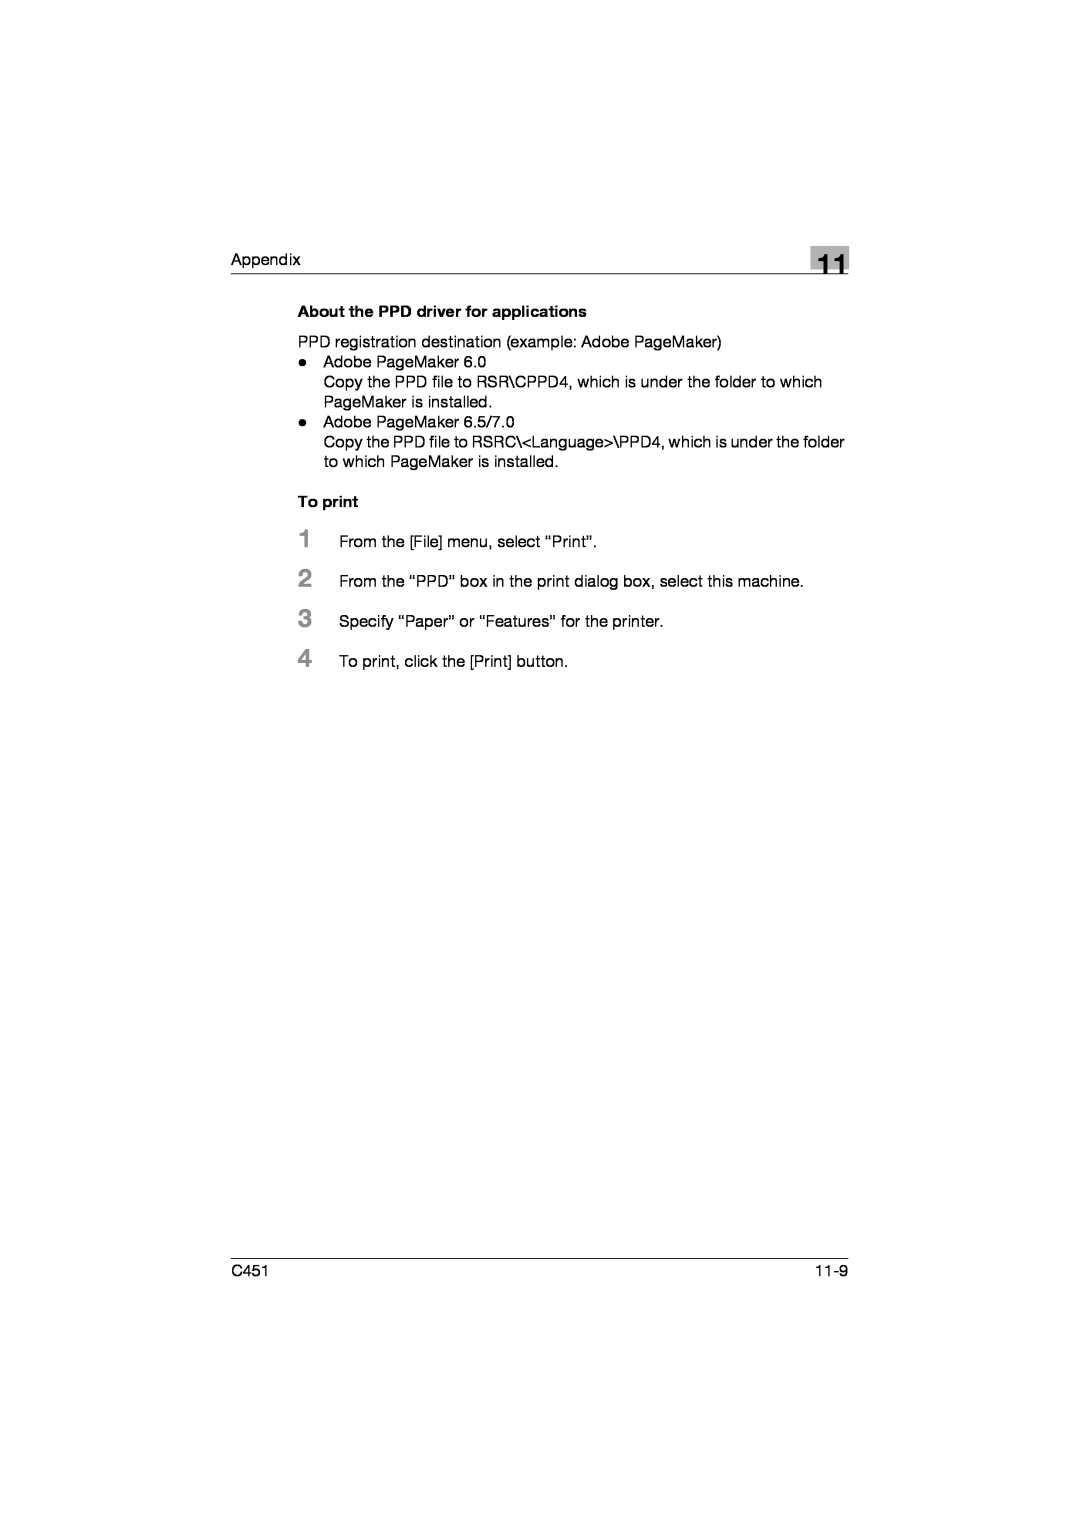 Konica Minolta C451 manual 1 2 3 4, About the PPD driver for applications, To print 